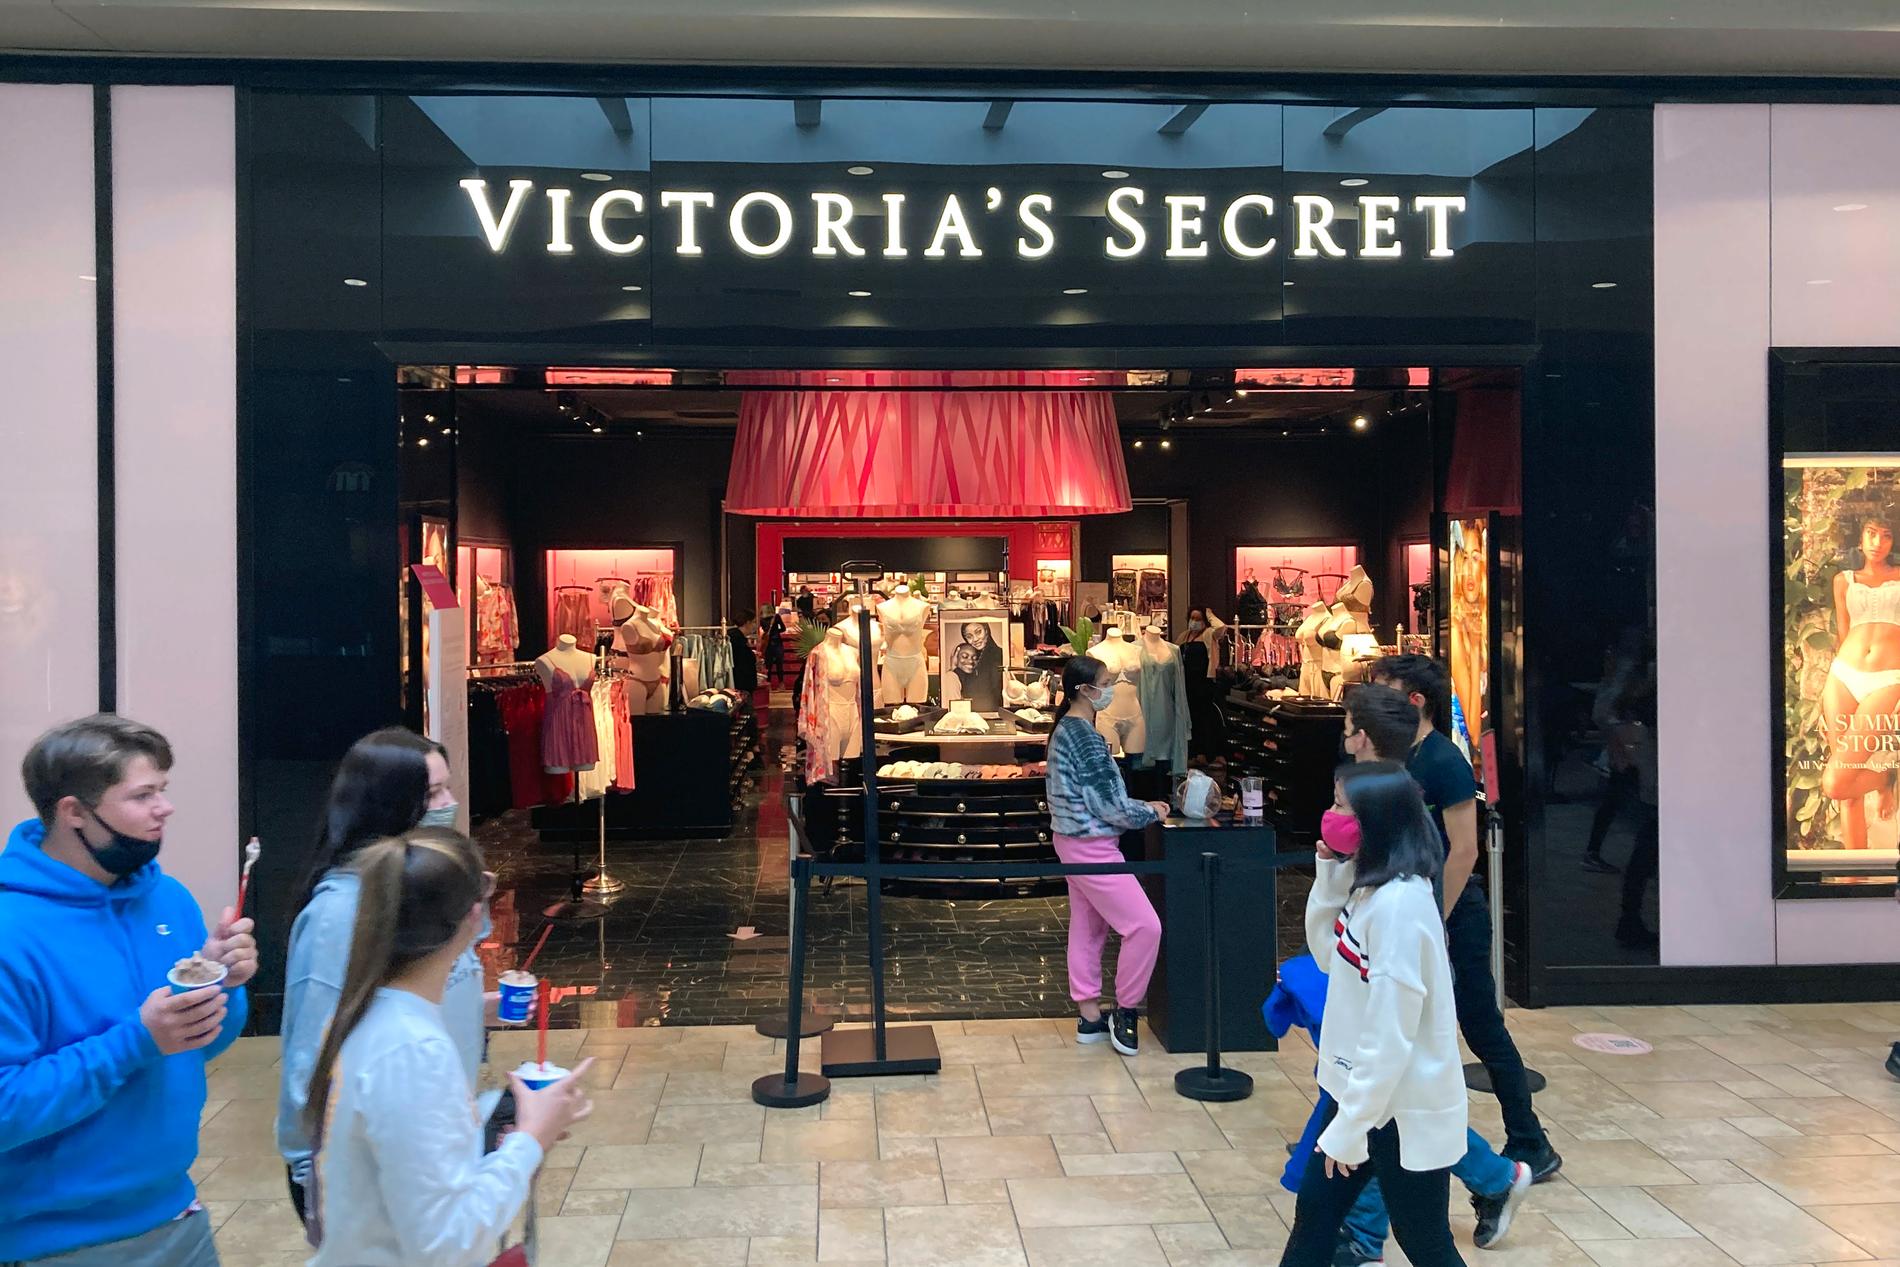 Victoria's Secret stock falls after disappointing results – E24